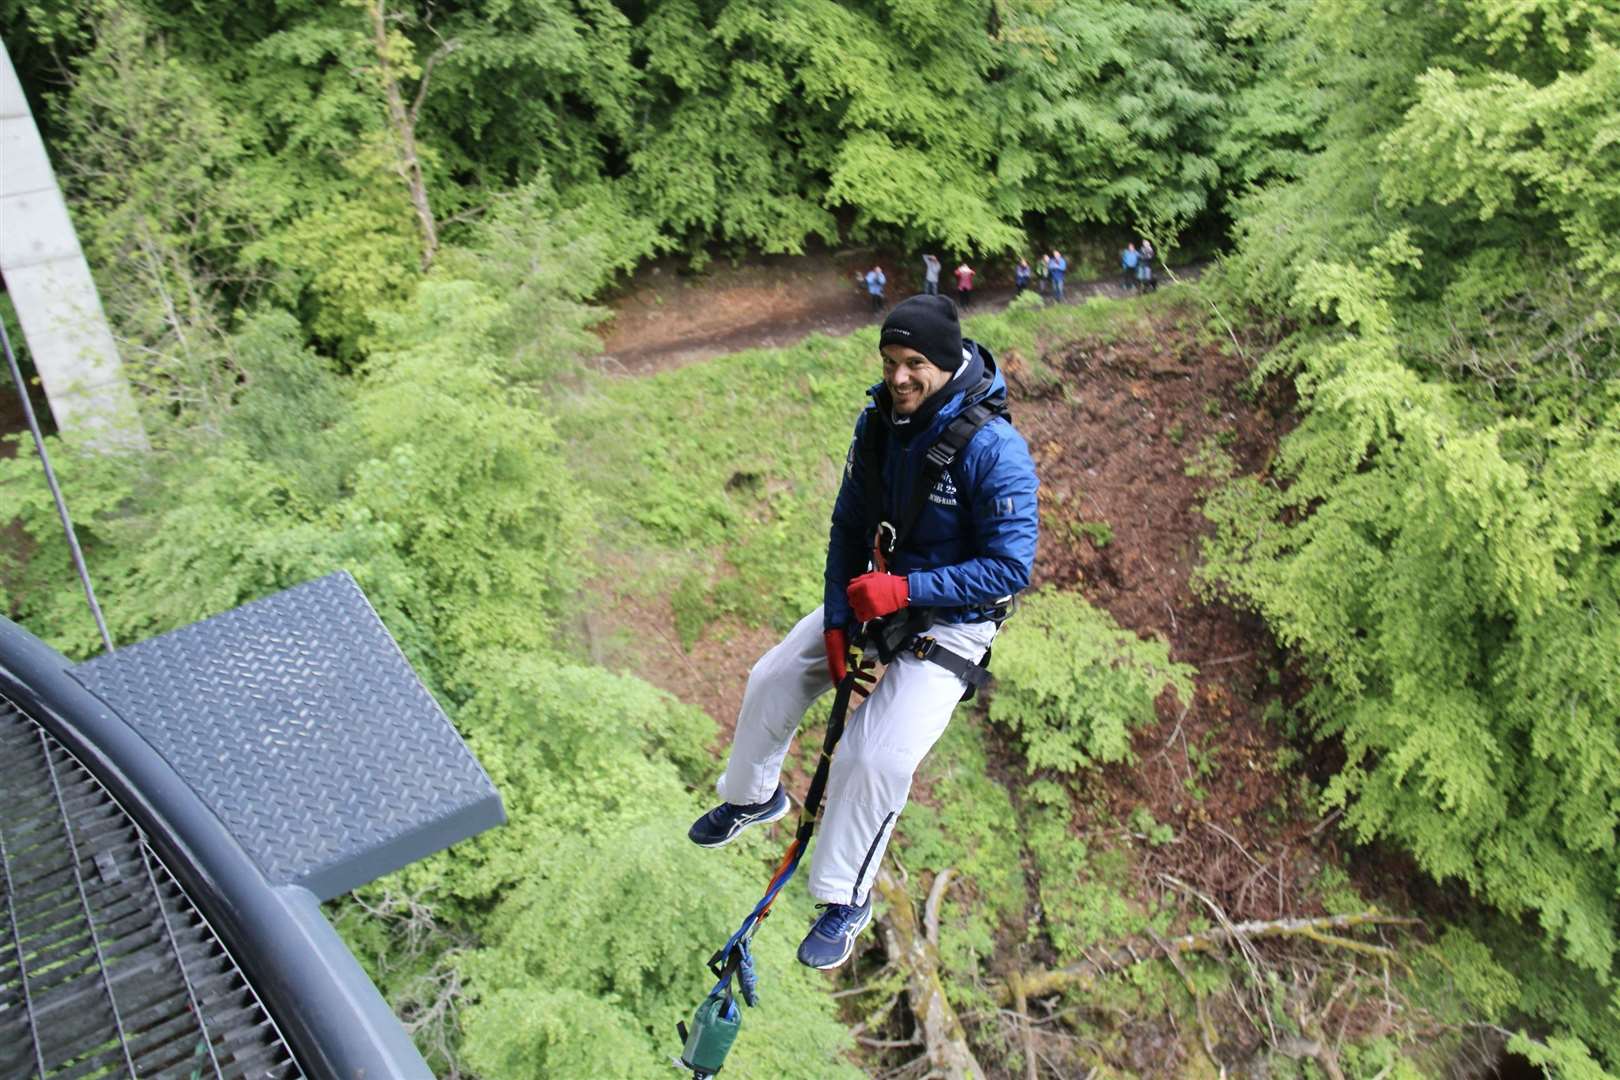 Mr Dibon leaping from the bungee platform at Garry Bridge, Perthshire (Heartland Media and PR/PA)